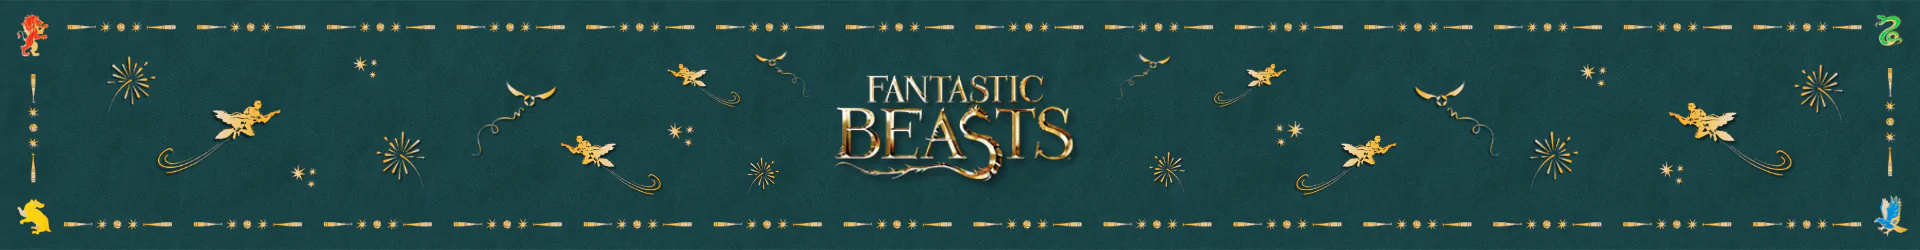 Fantastic Beasts and Where to Find Them keychain banner